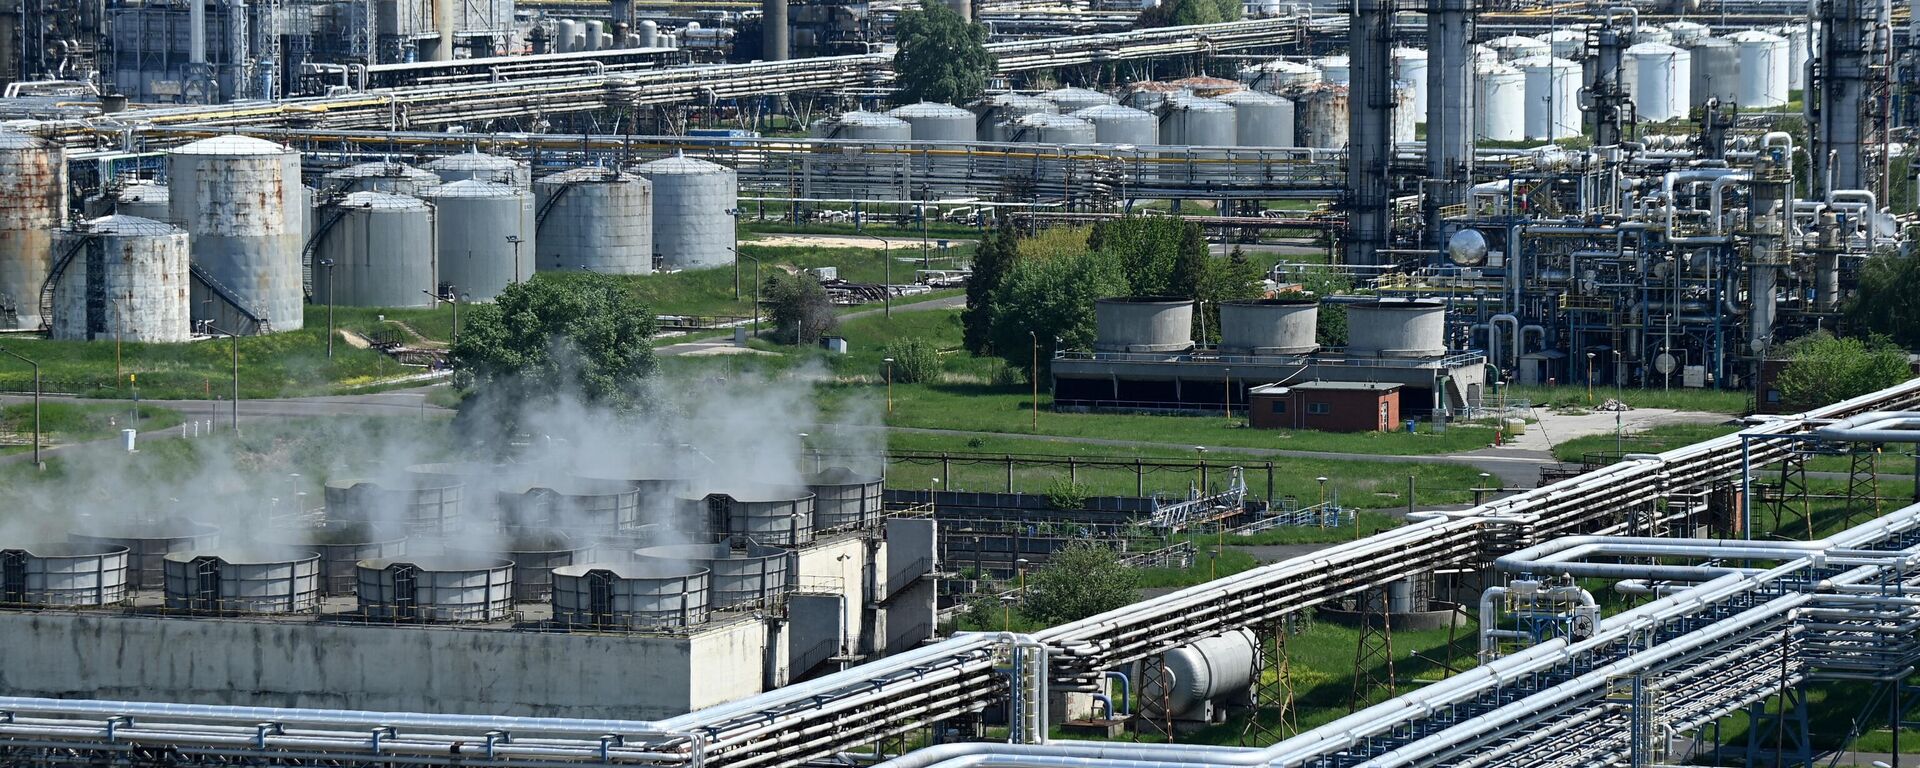 A photo taken on May 5, 2022 shows steam rising at the Duna (Danube) Refinery of Hungarian MOL Company near the town of Szazhalombatta, about 30 km south of Budapest. - Europe faces the prospect of a diesel supply shortage following sanctions on Russia.  - Sputnik International, 1920, 19.07.2022